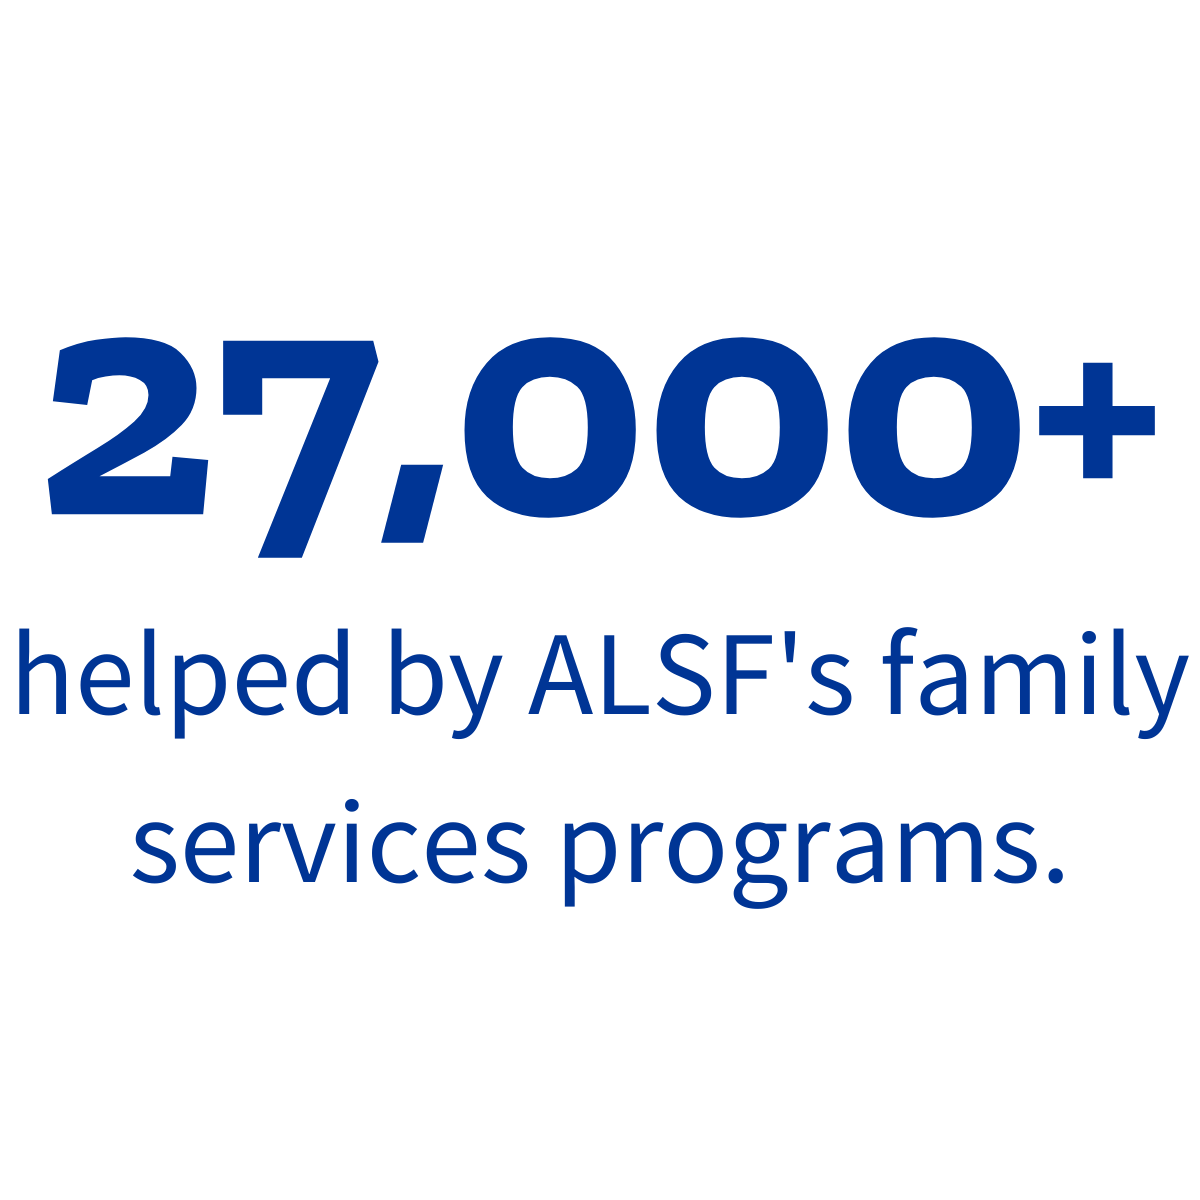 27,000+ helped by ALSF's family service programs